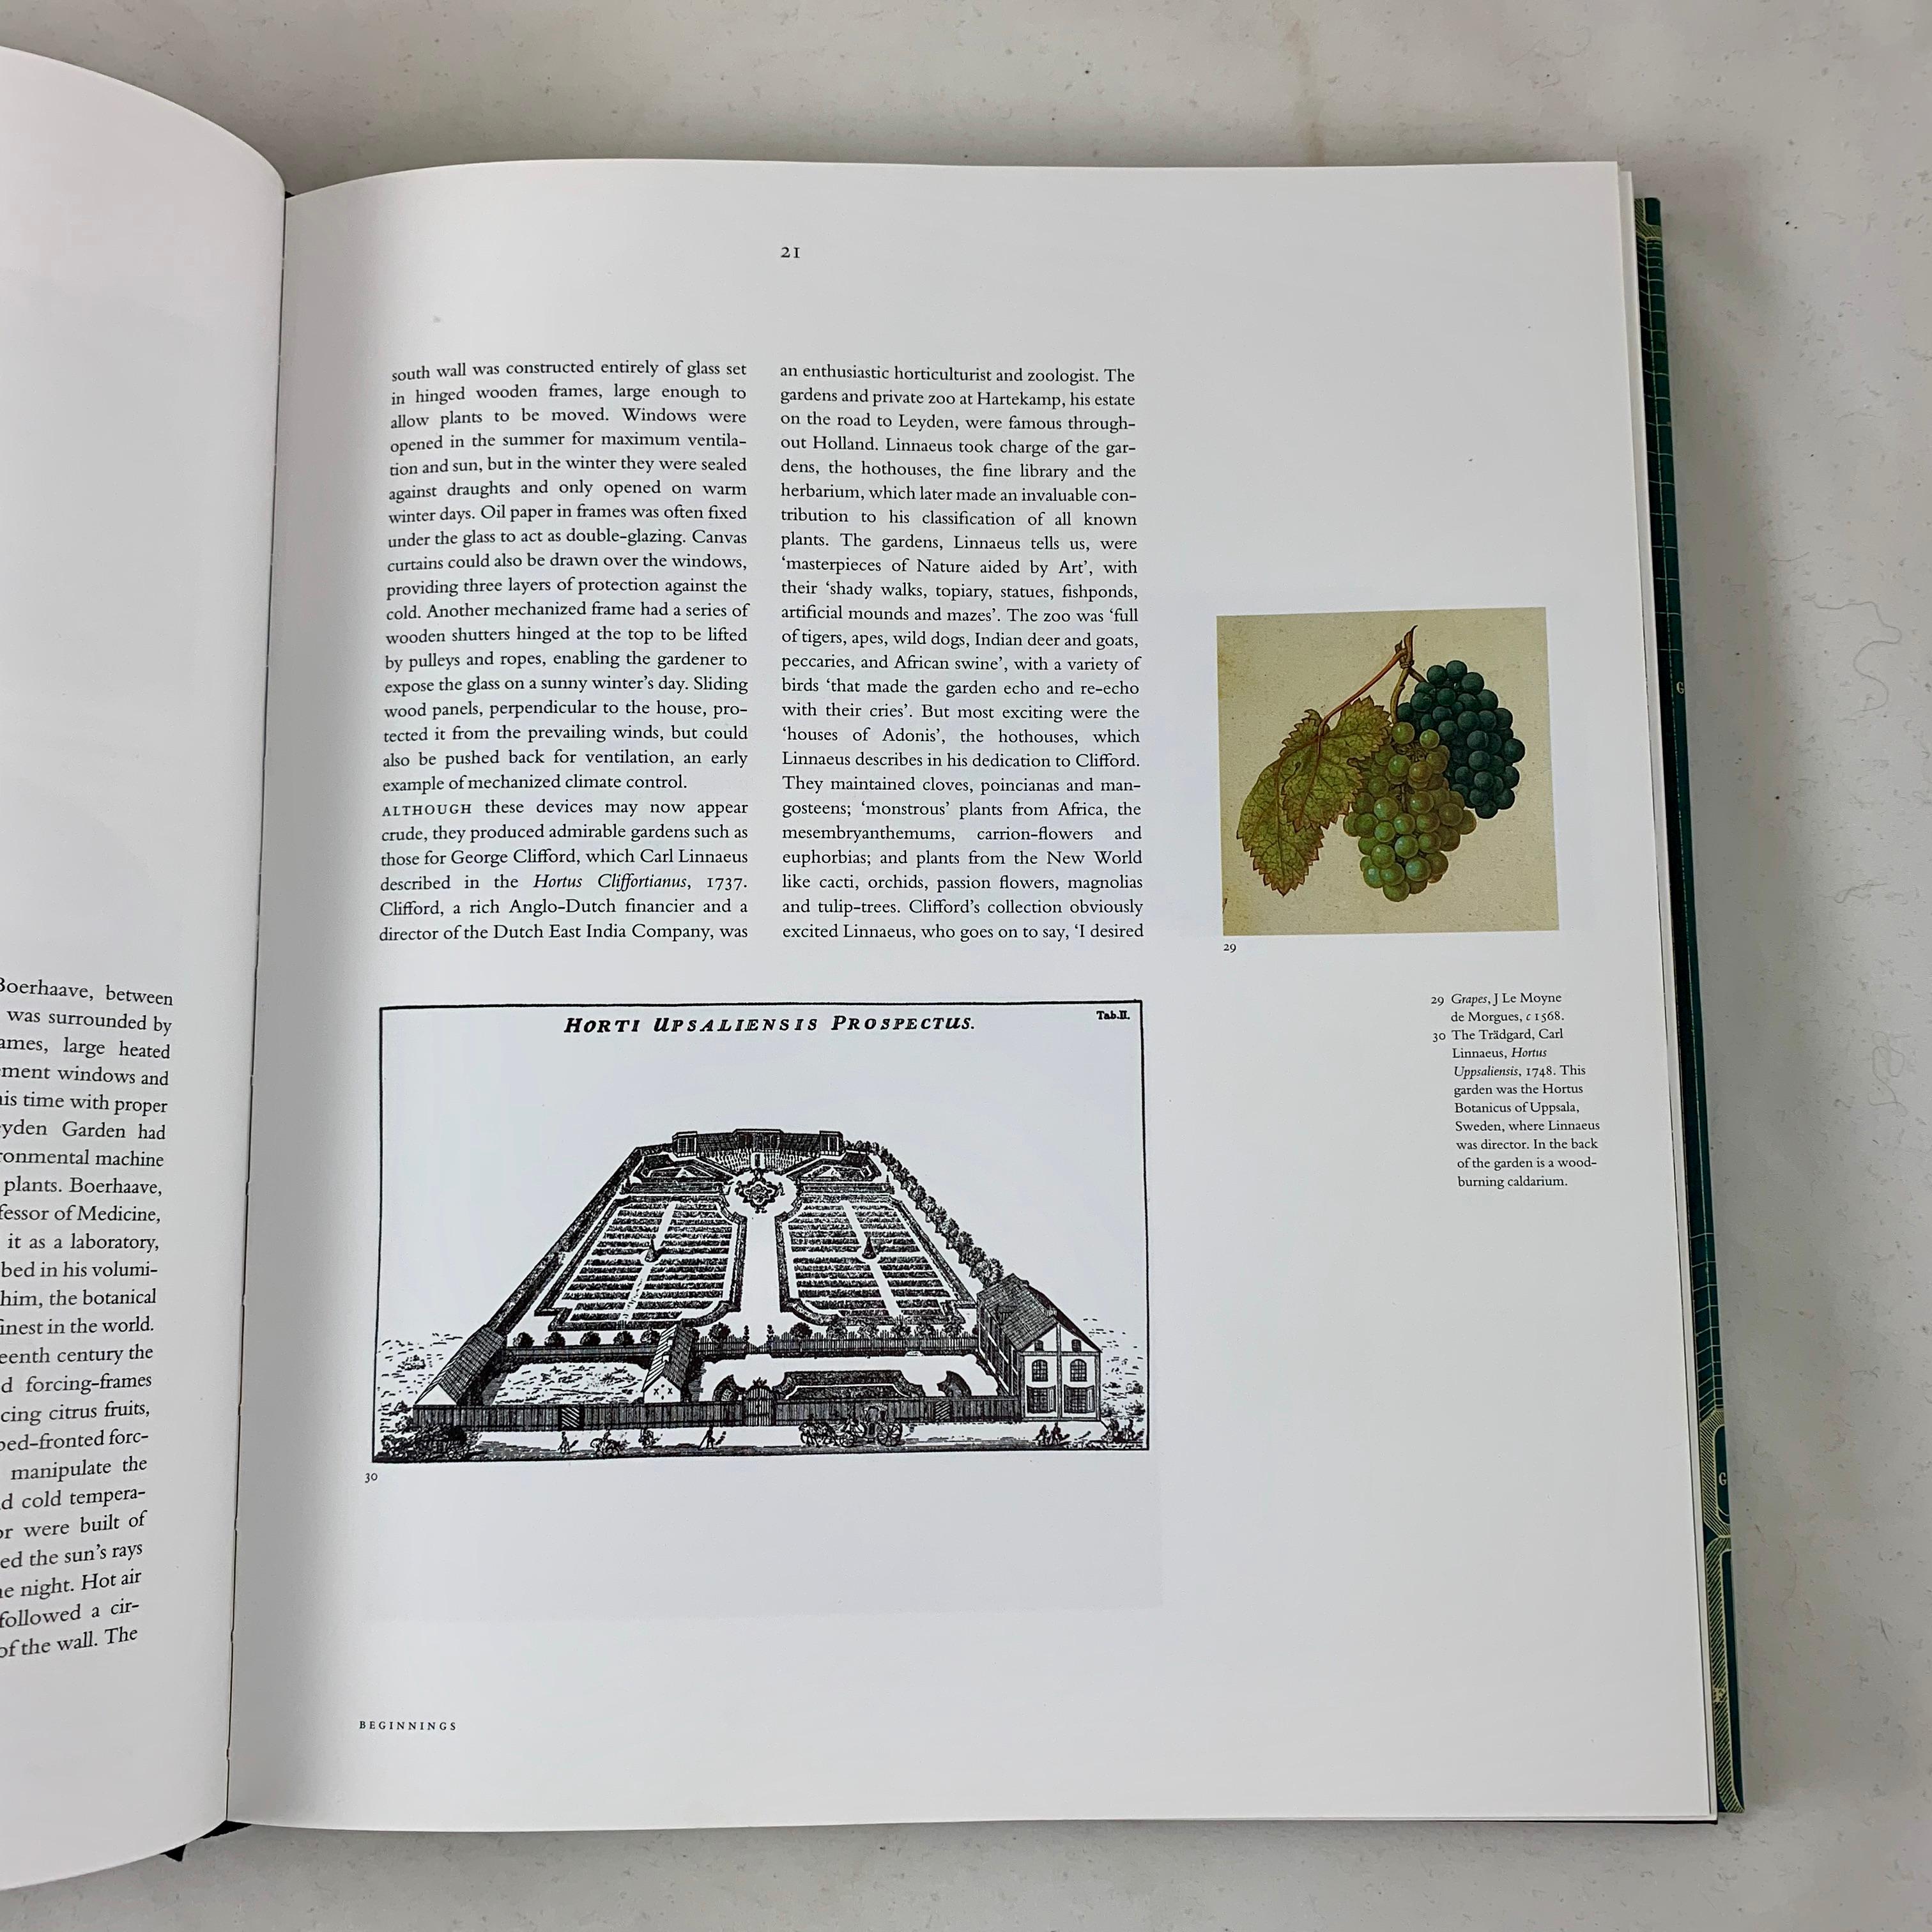 Machine-Made The Glasshouse by John Hix – Phaidon Architecture History and Garden Photo Book For Sale